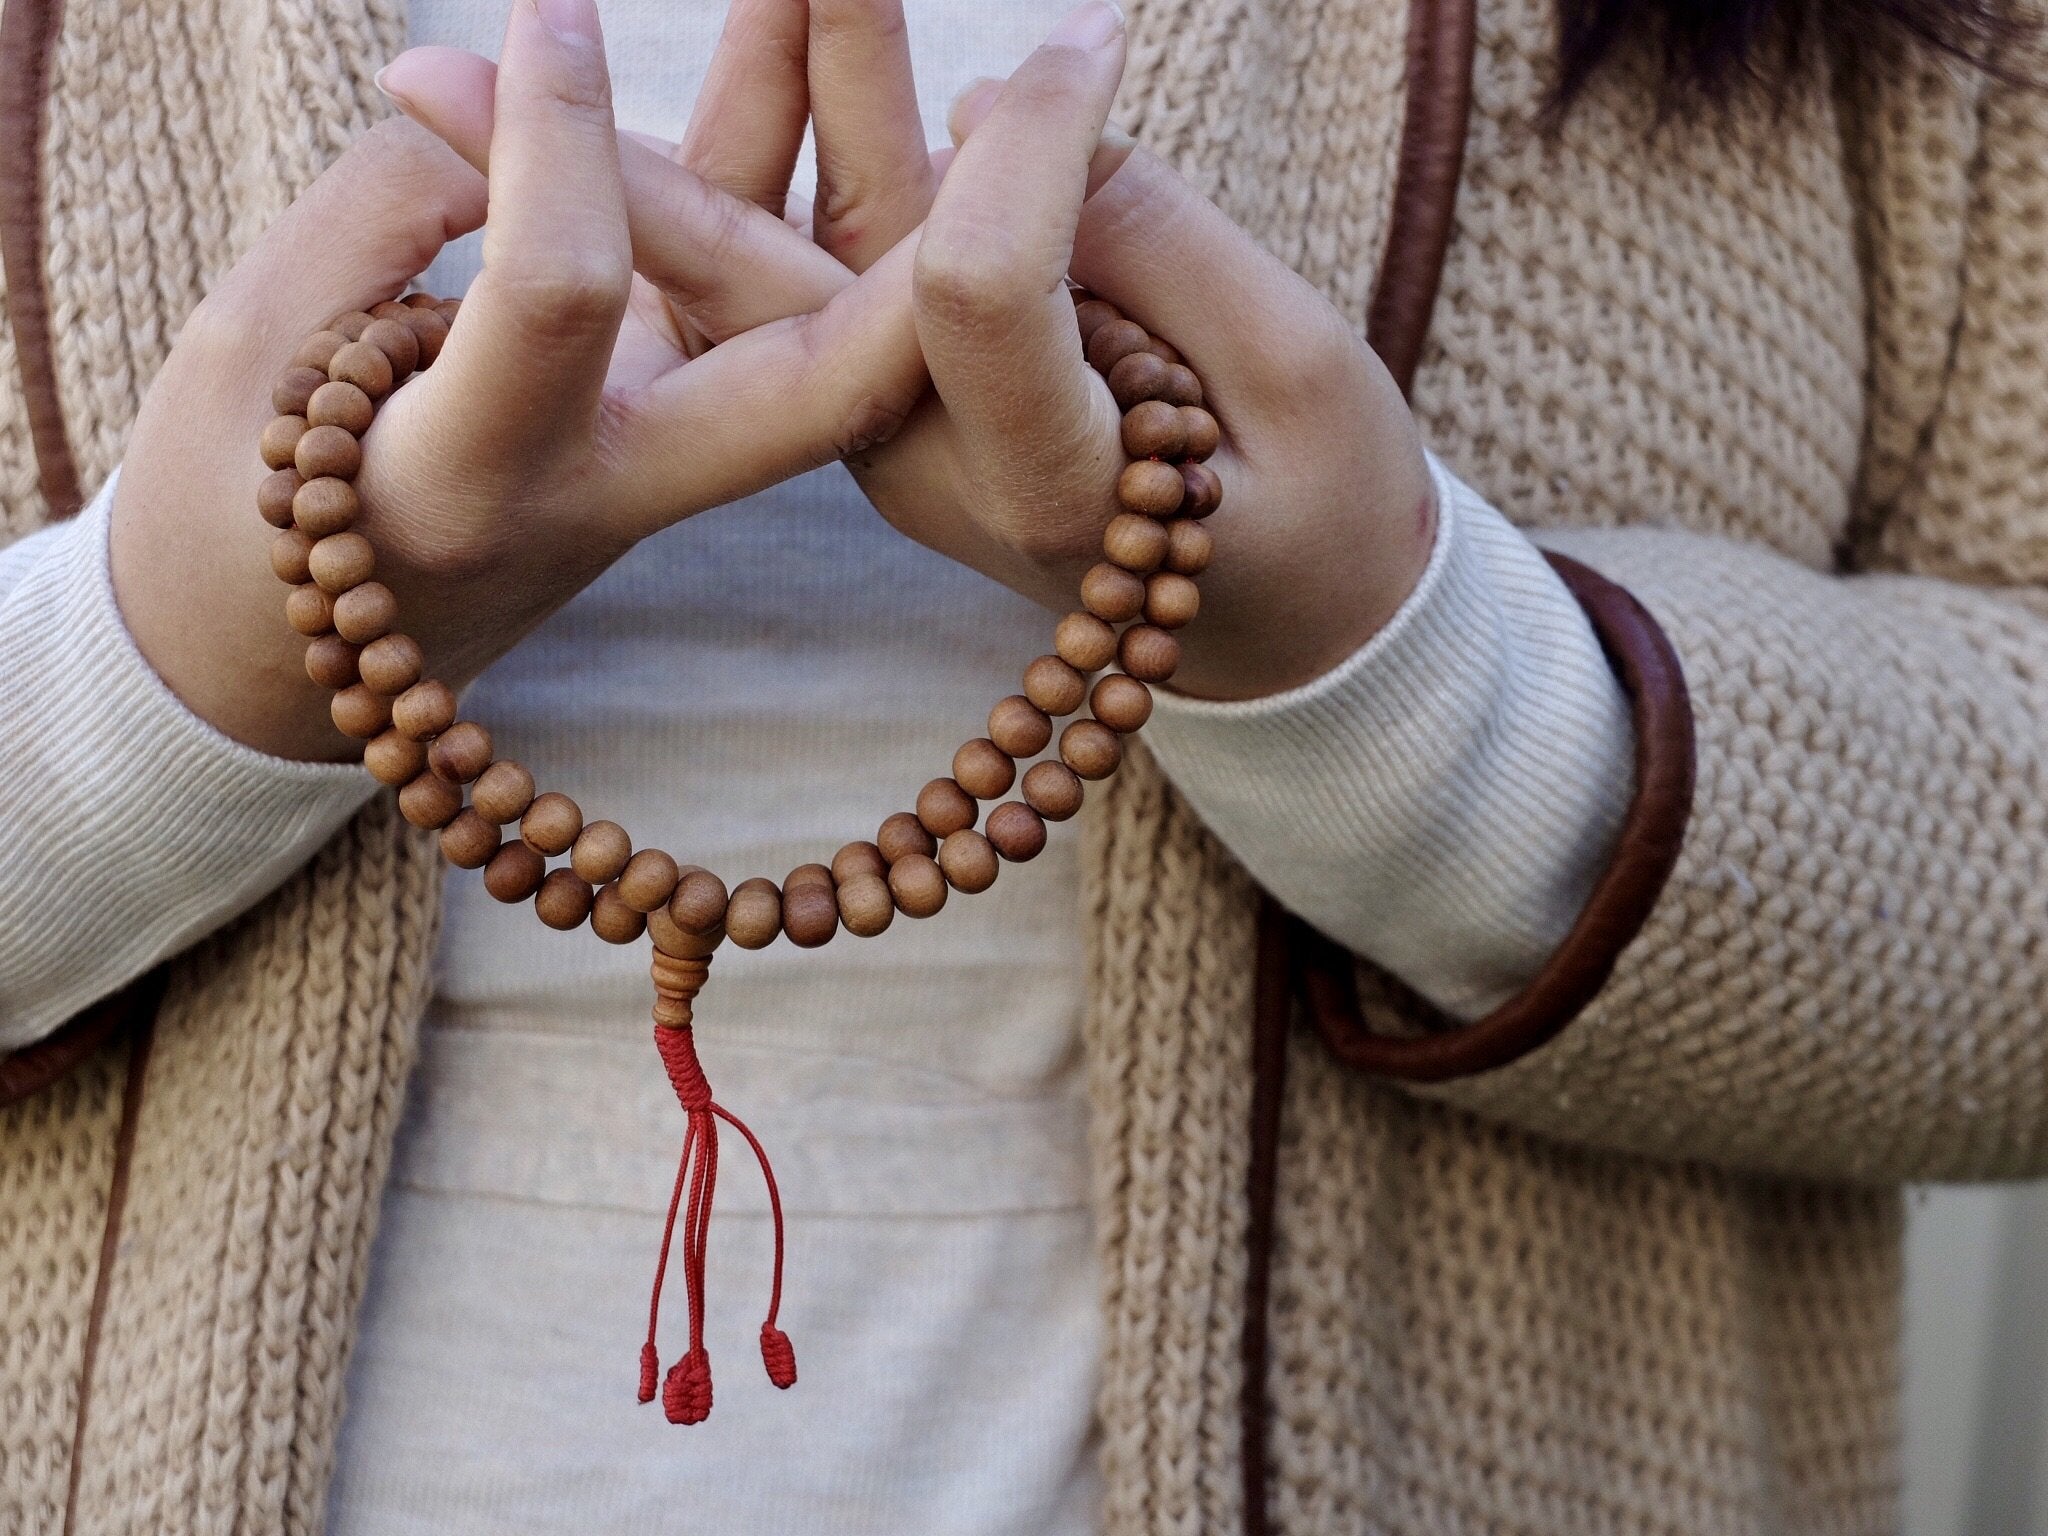 What are Mala Beads? And How Do I Use Them?